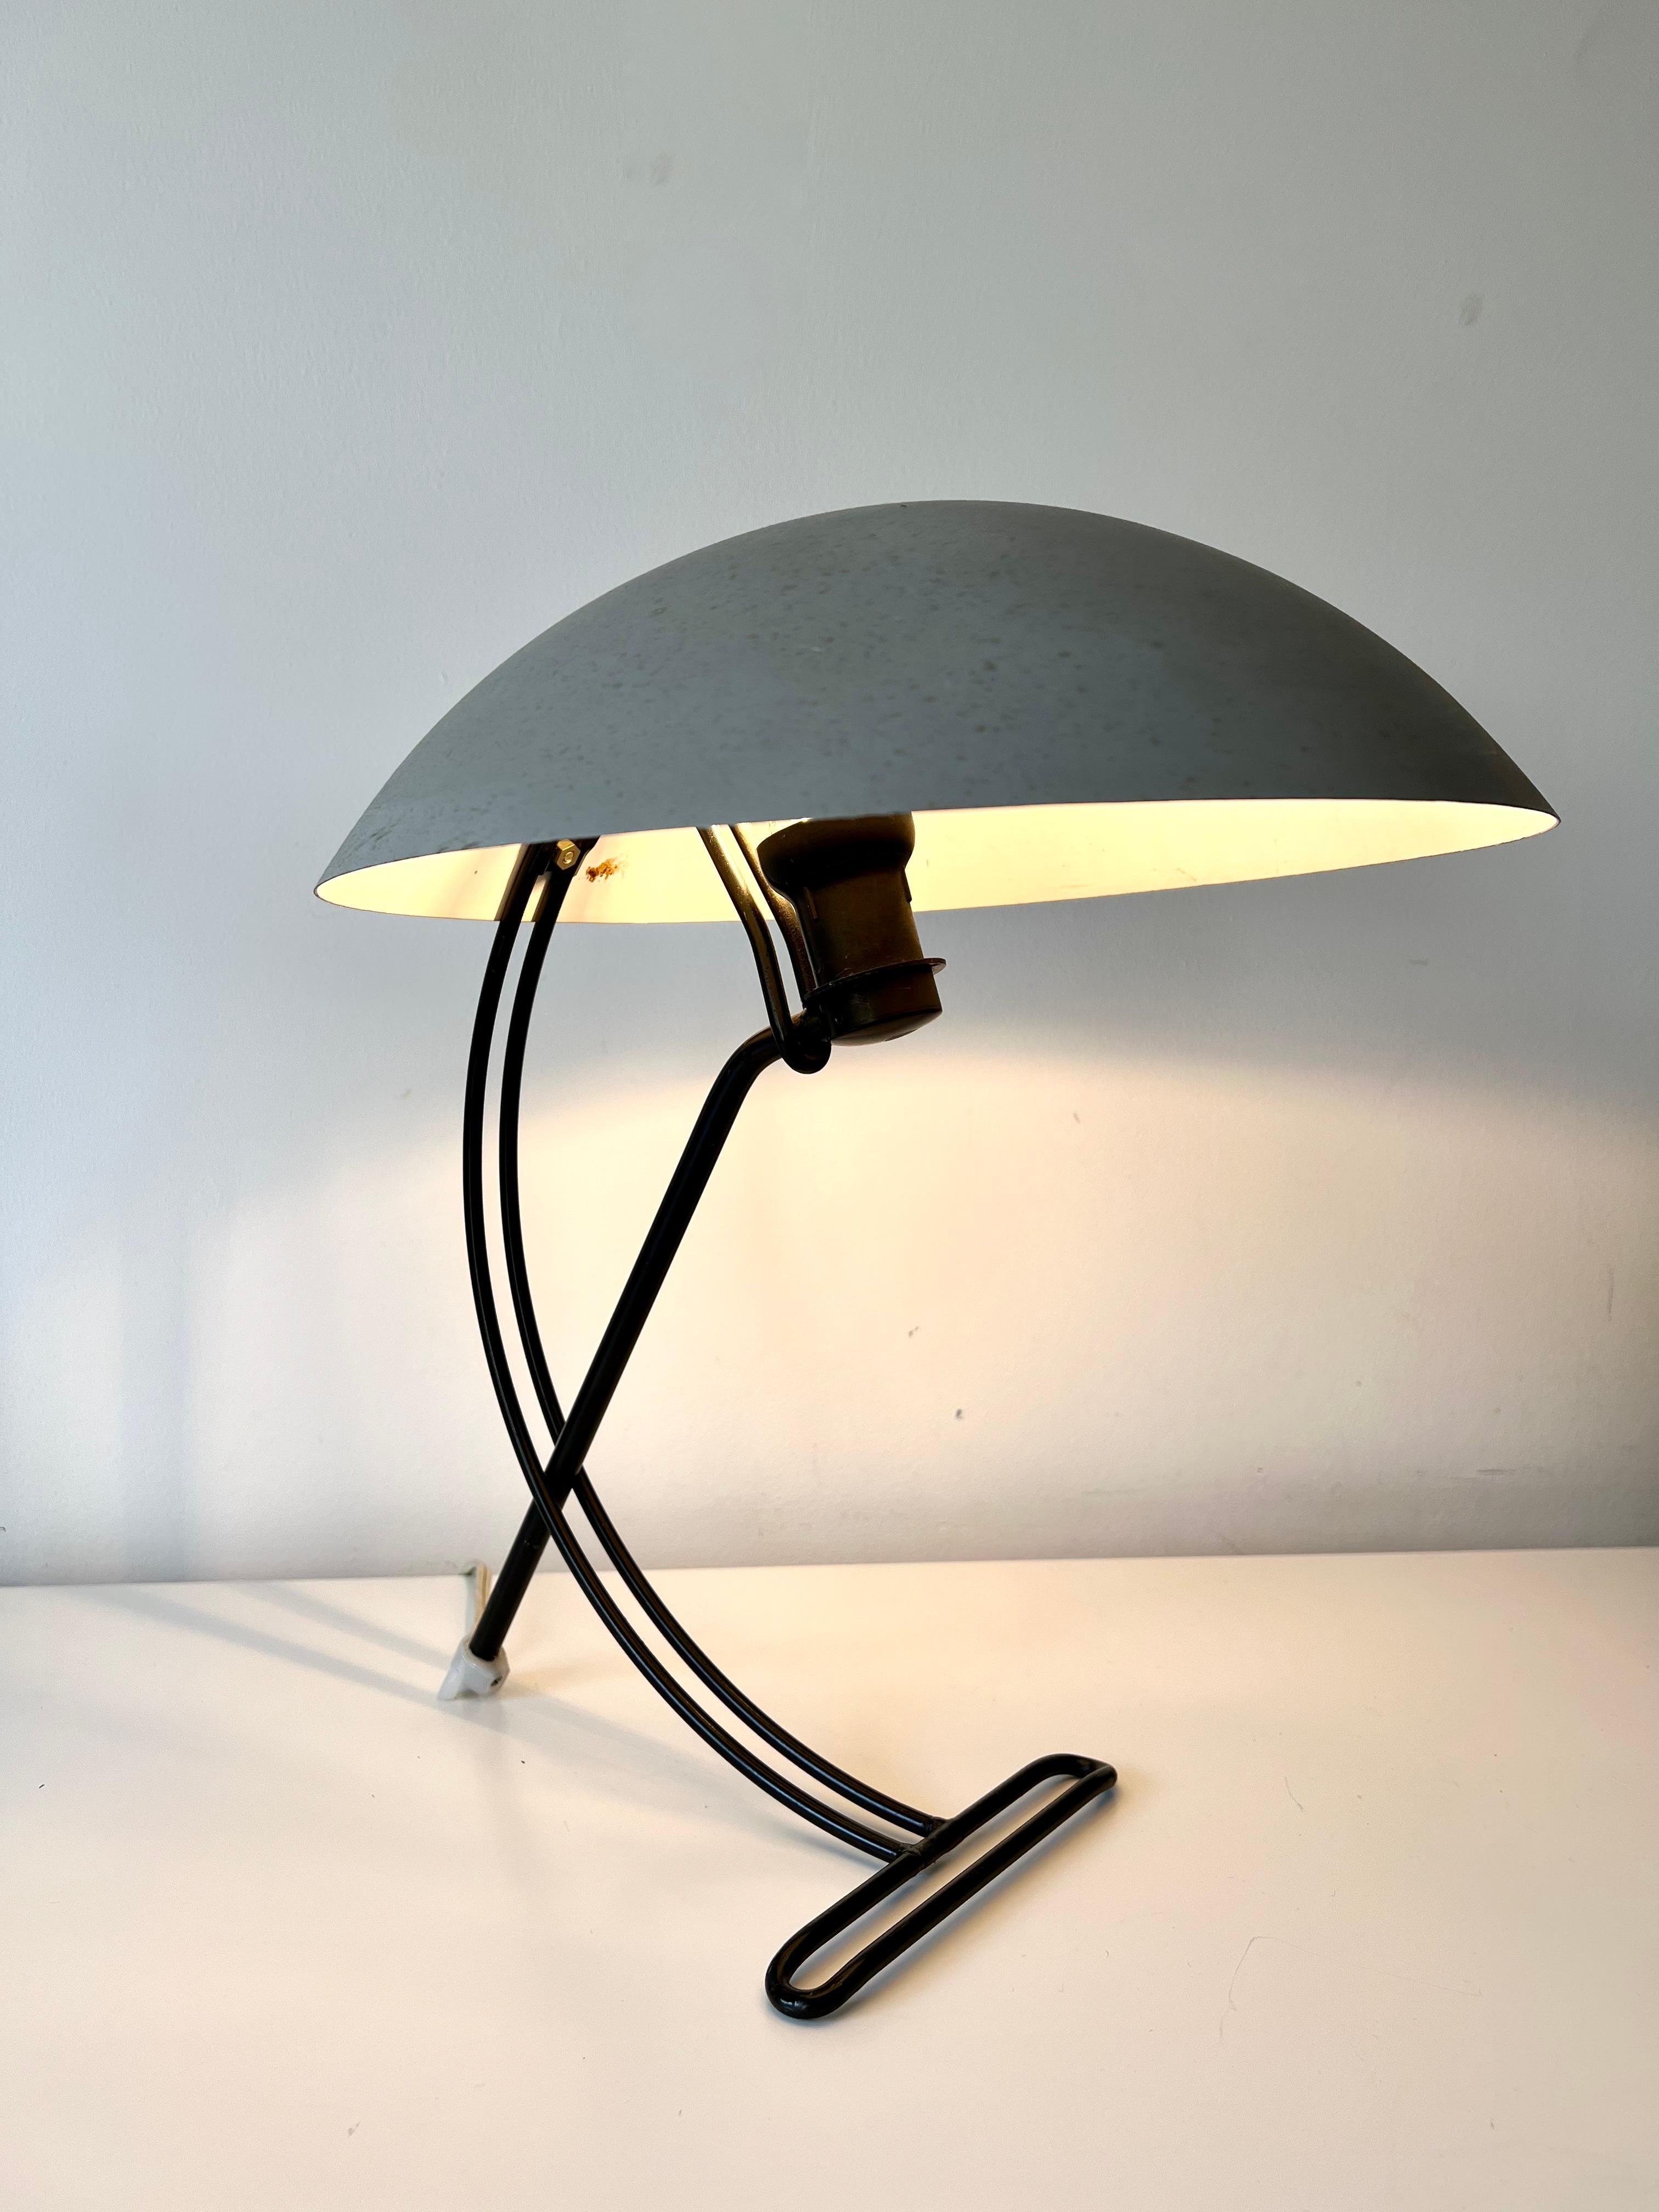 1950s table lamp by Louis Kalff for Philips, model NB100

This is the rare original, not the later re-issue.

Black painted base with light grey/blue splatter paint effect shade. Philips logo to the base. 

In good original condition, no restoration